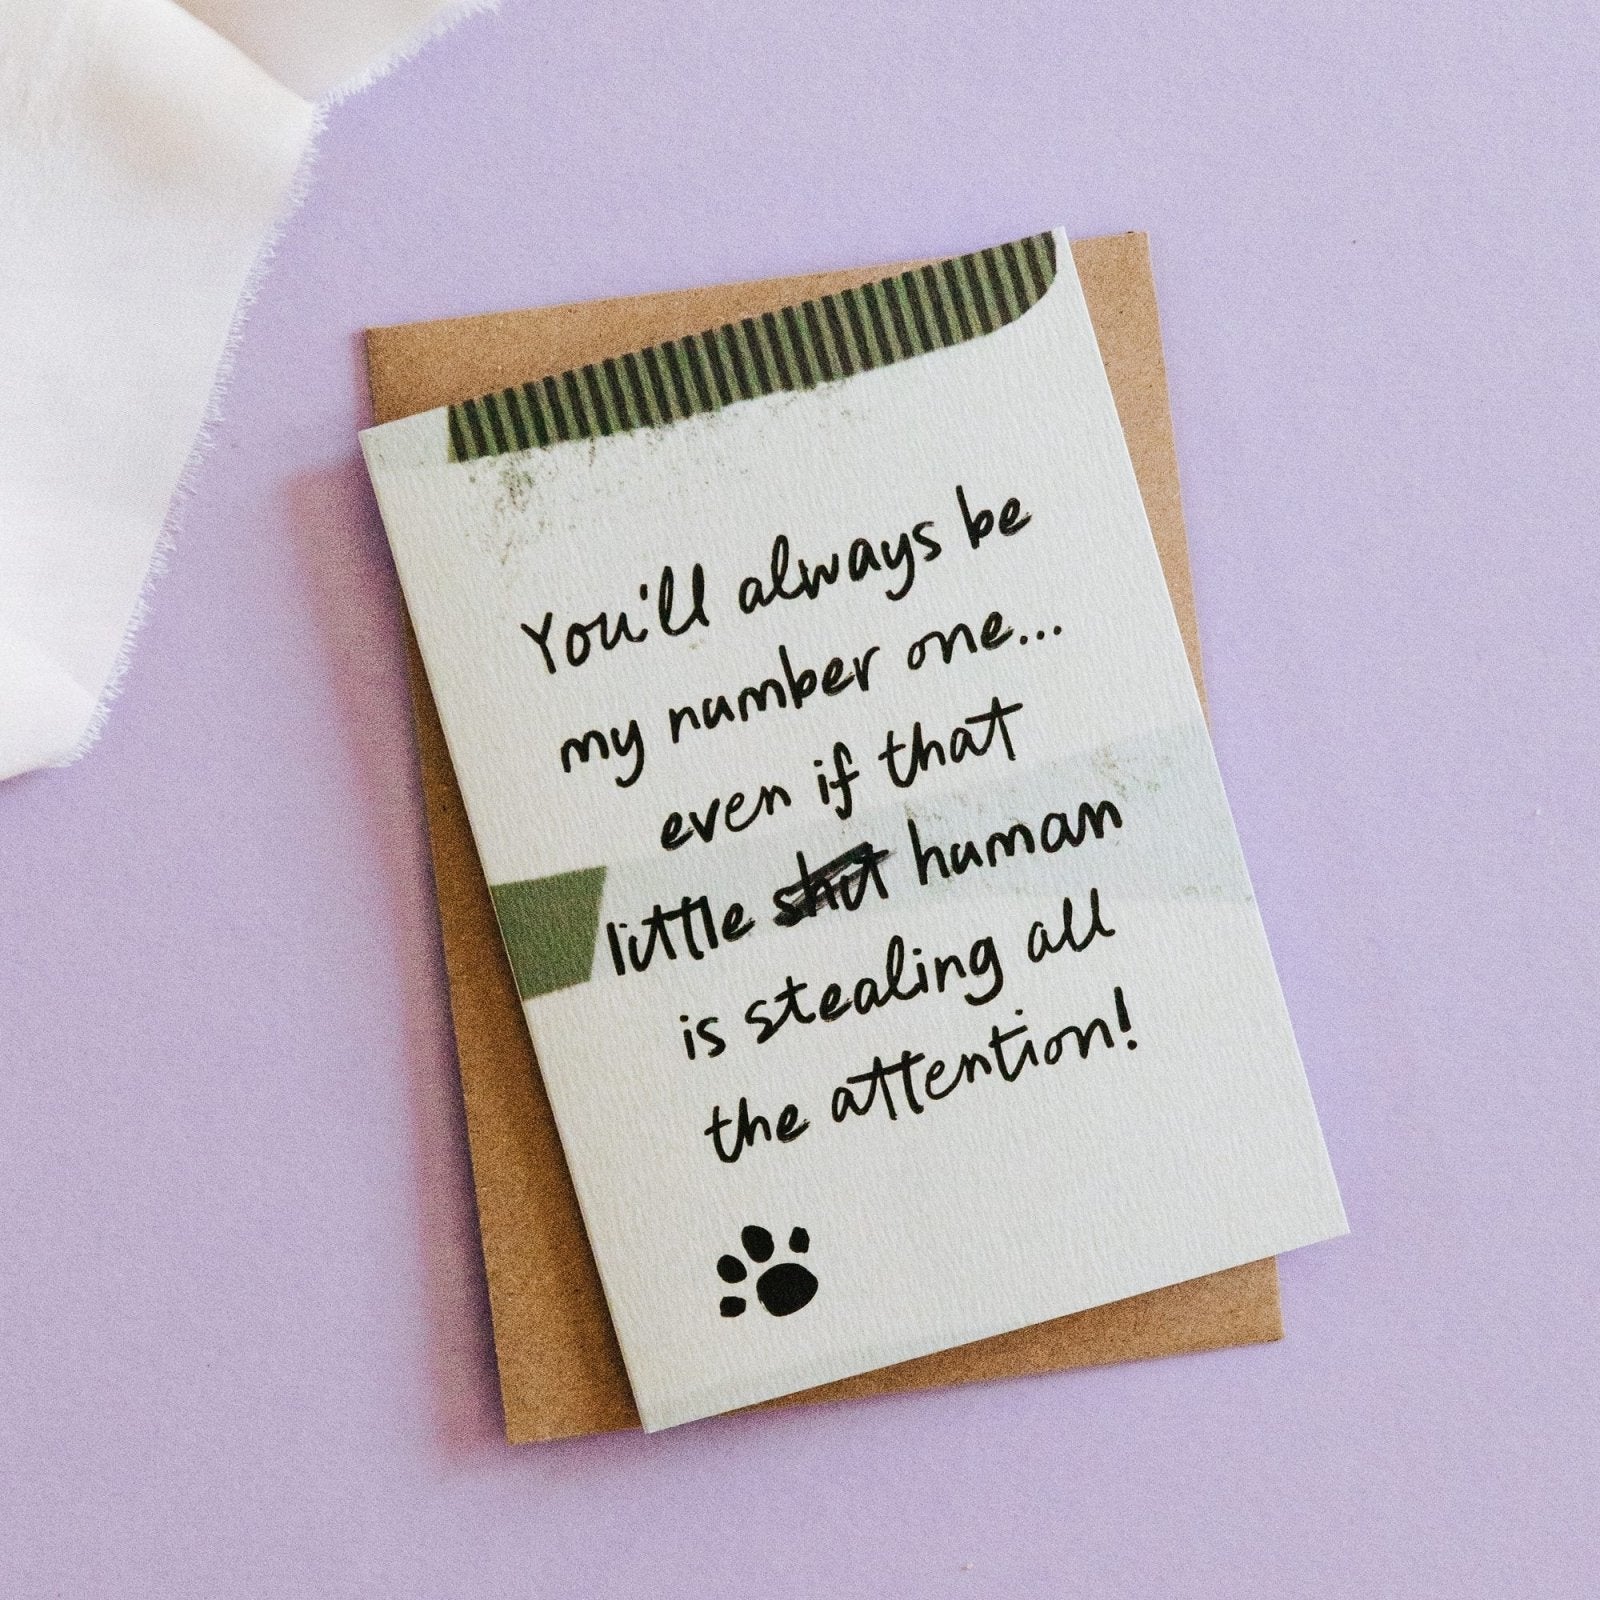 My Number One - Funny Card from Dog or Cat - I am Nat Ltd - Greeting Card